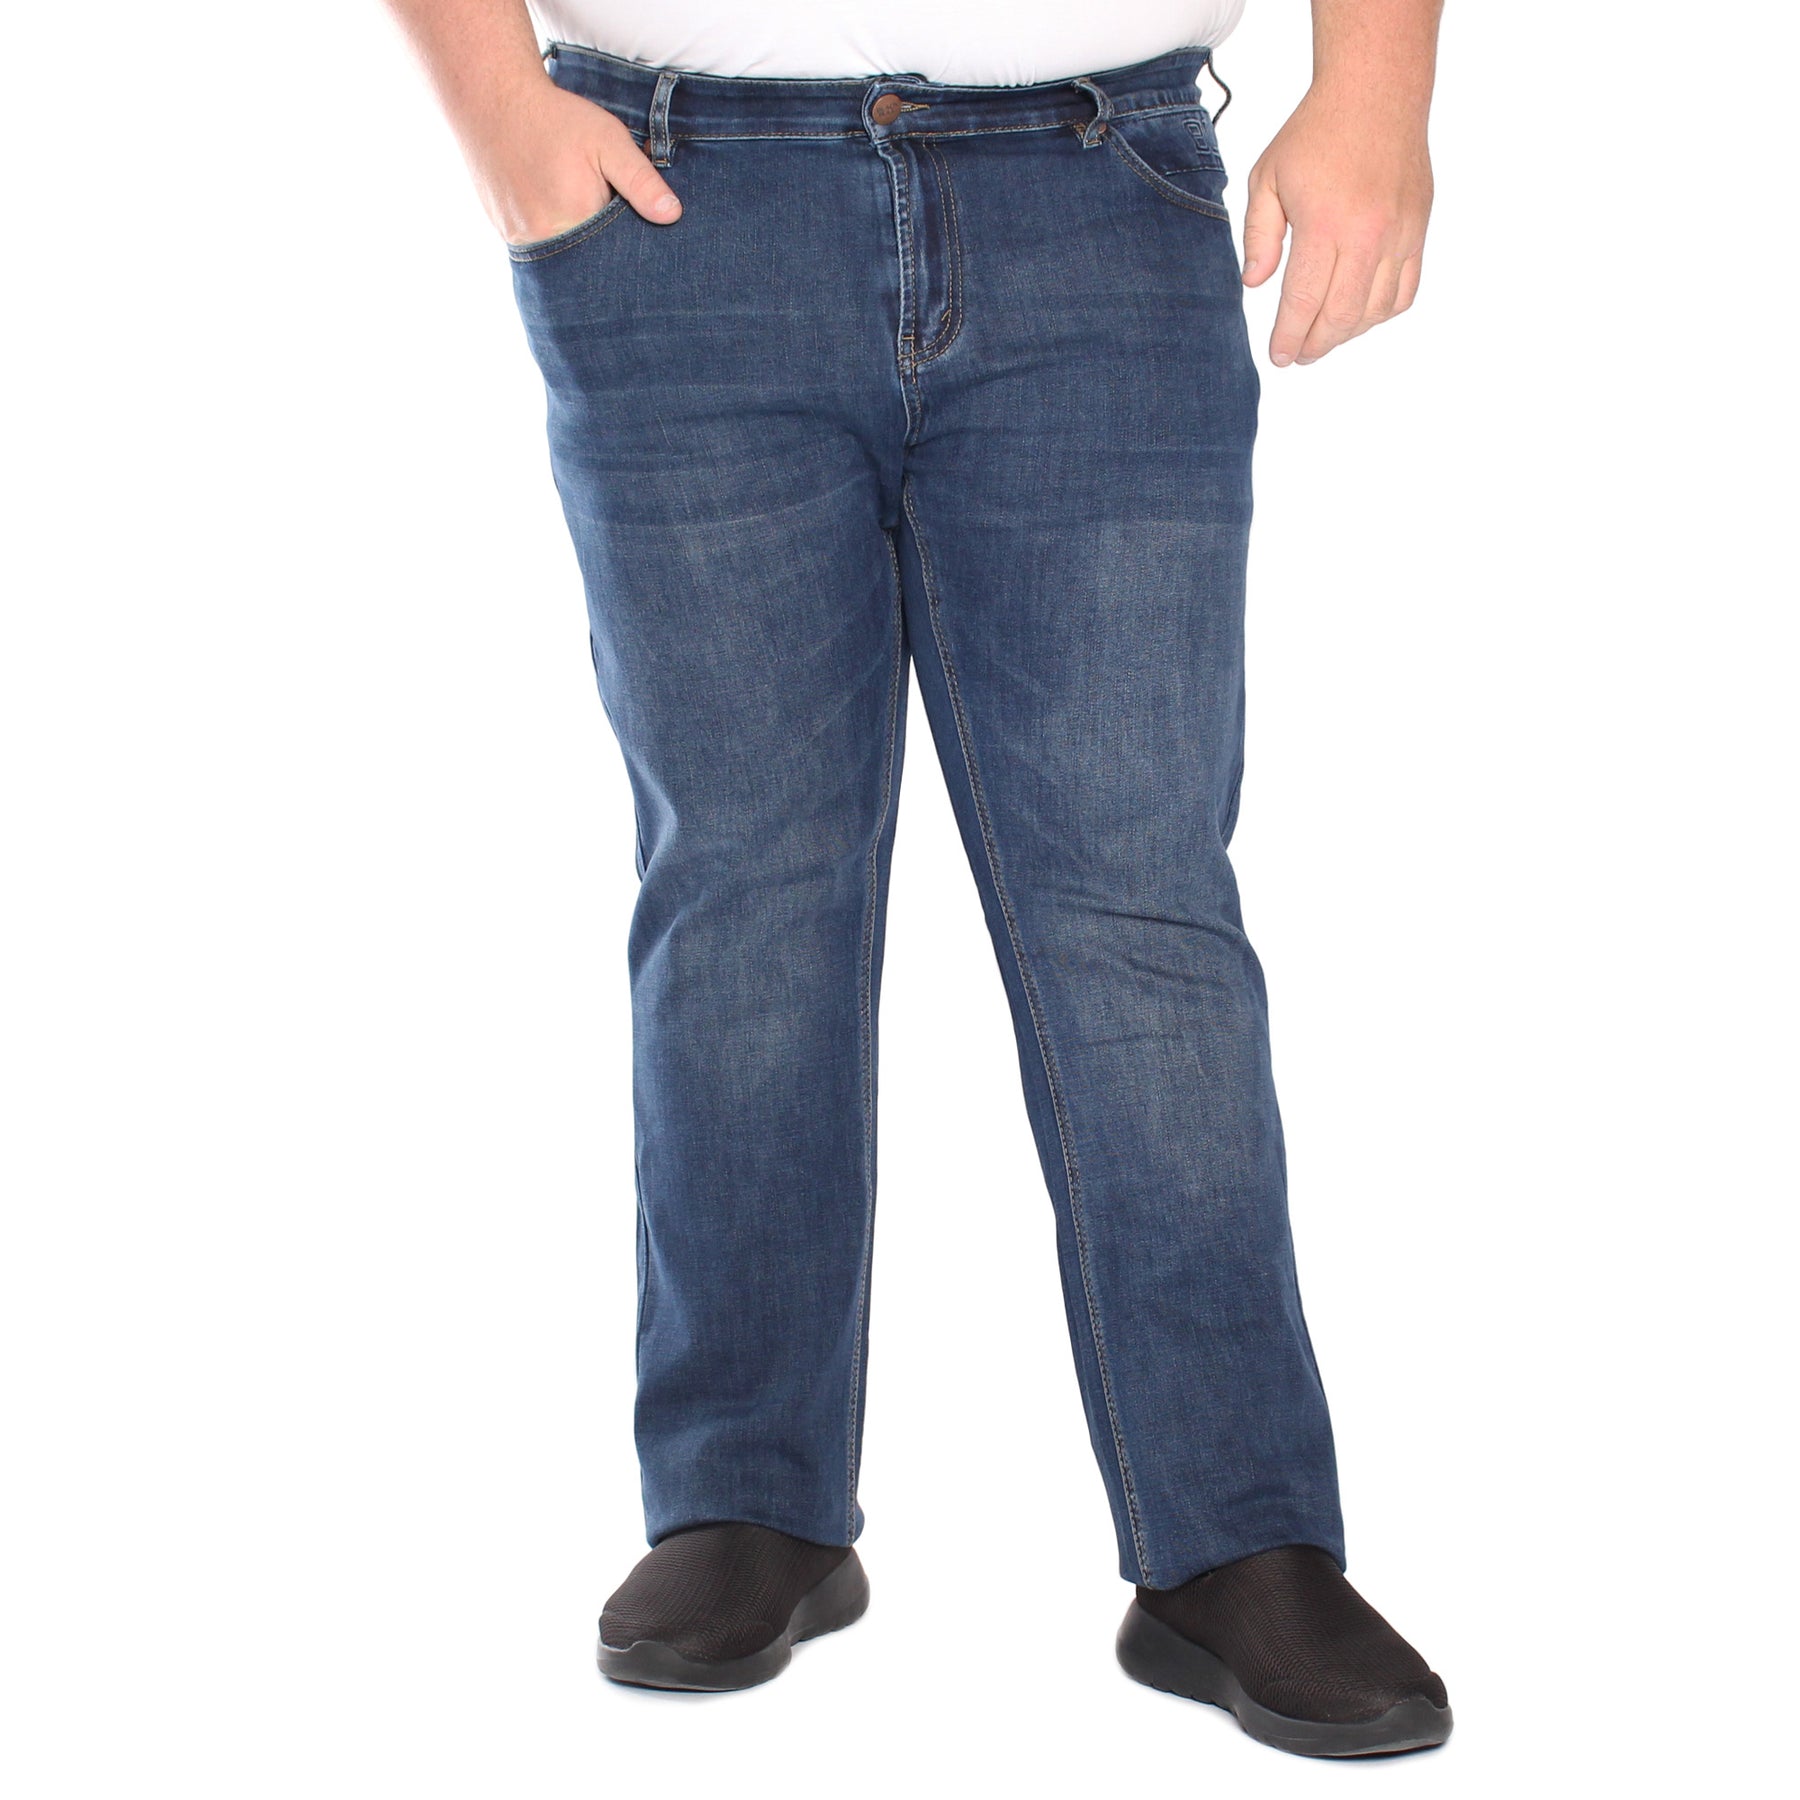 Jean extensible, taille basse